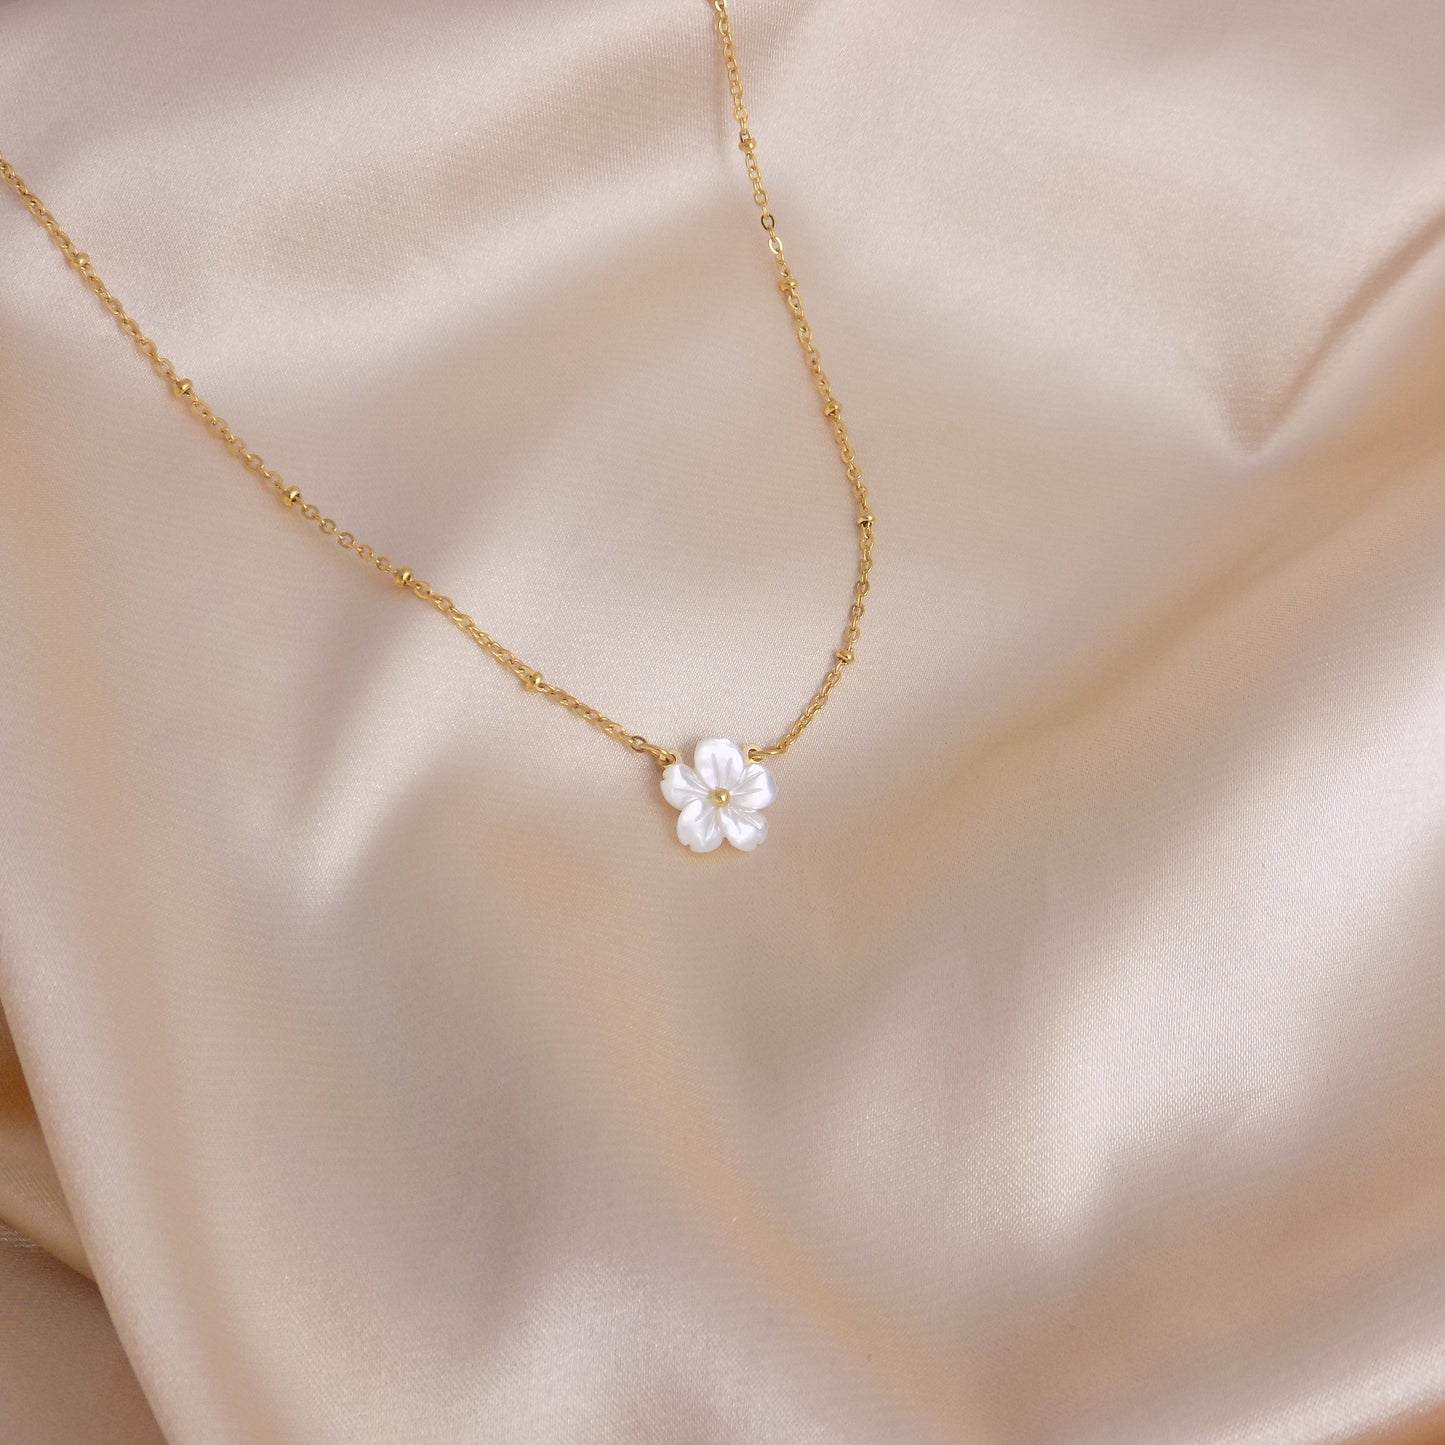 Mother of Pearl Flower Necklace Satellite Chain - 18K Gold Stainless Steel